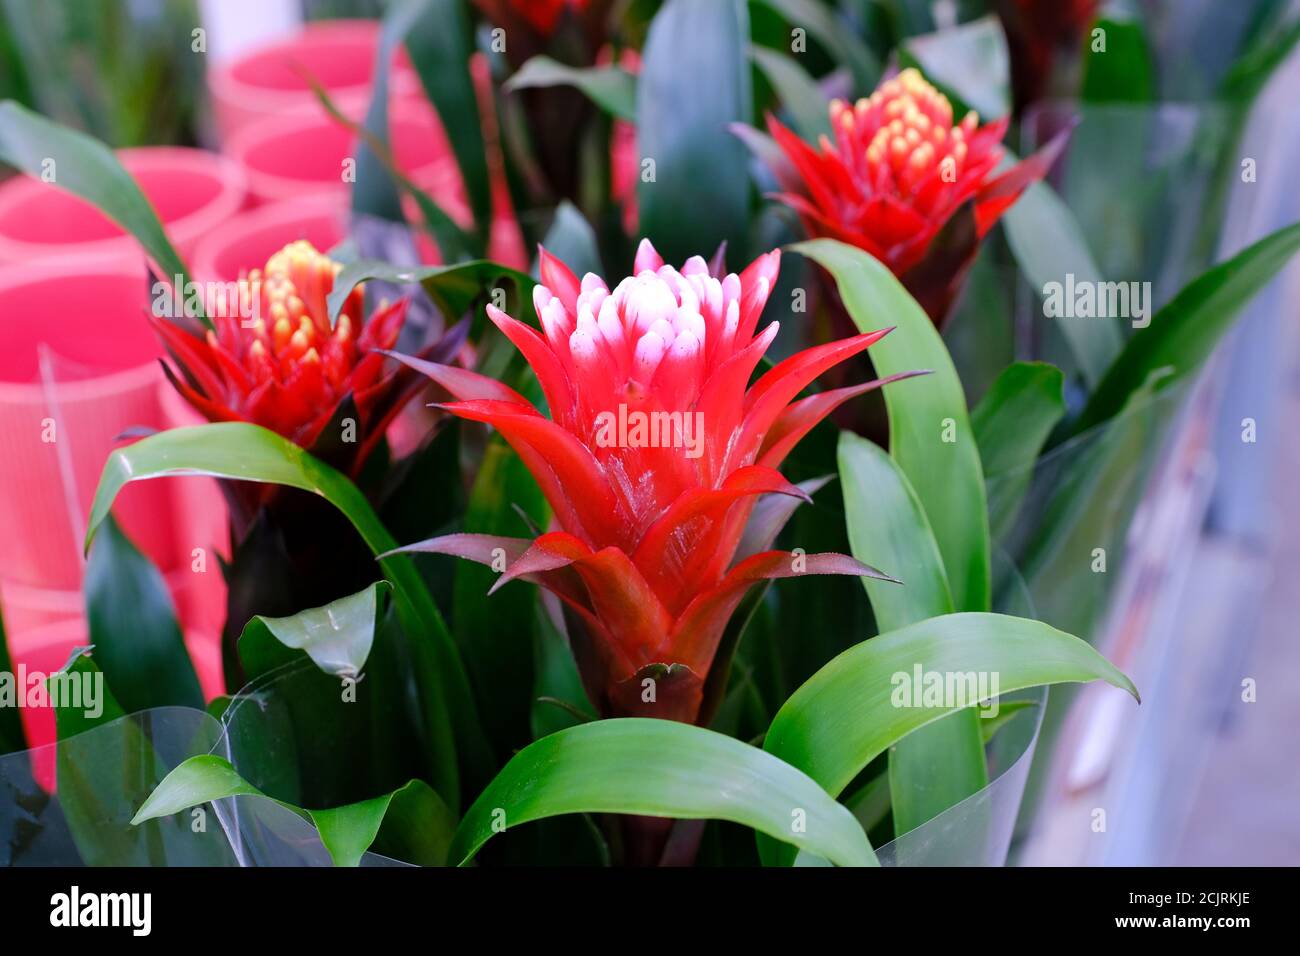 Bromelia Guzmania, flower with red petals and green leaves. Family Bromeliaceae. Sale in store. Stock Photo